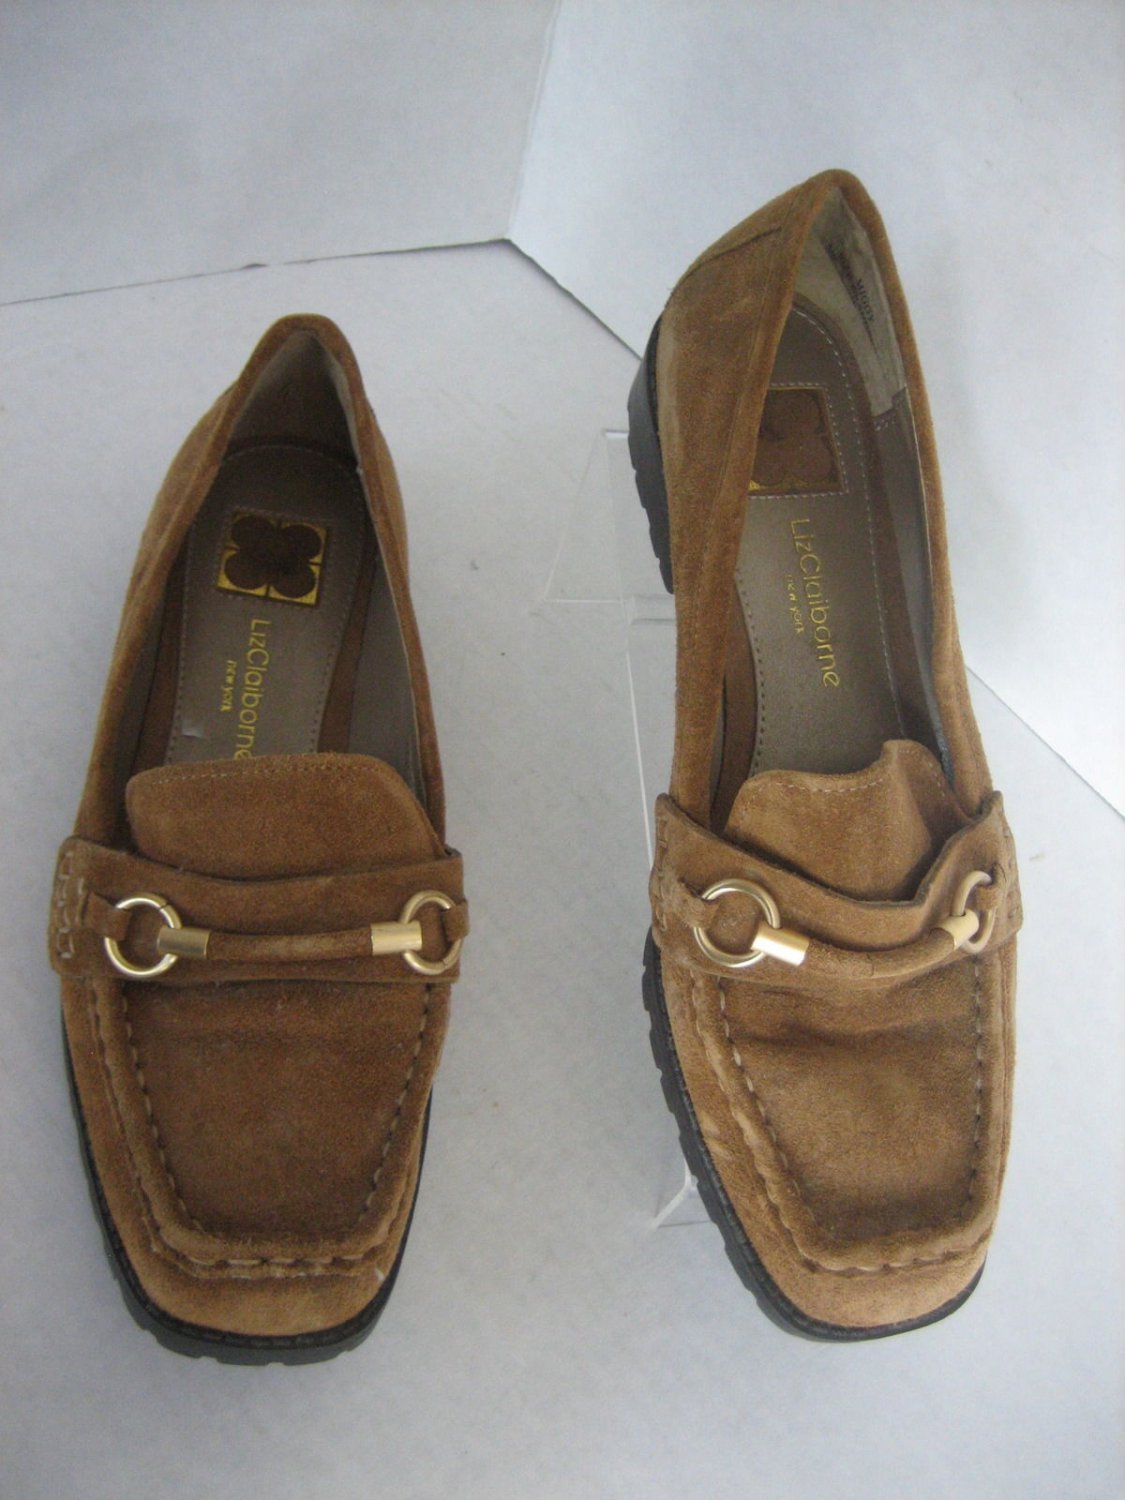 Liz Claiborne Miggy Tan Suede Loafer Style Low Heel Shoe Sz 8 Pre-Owned